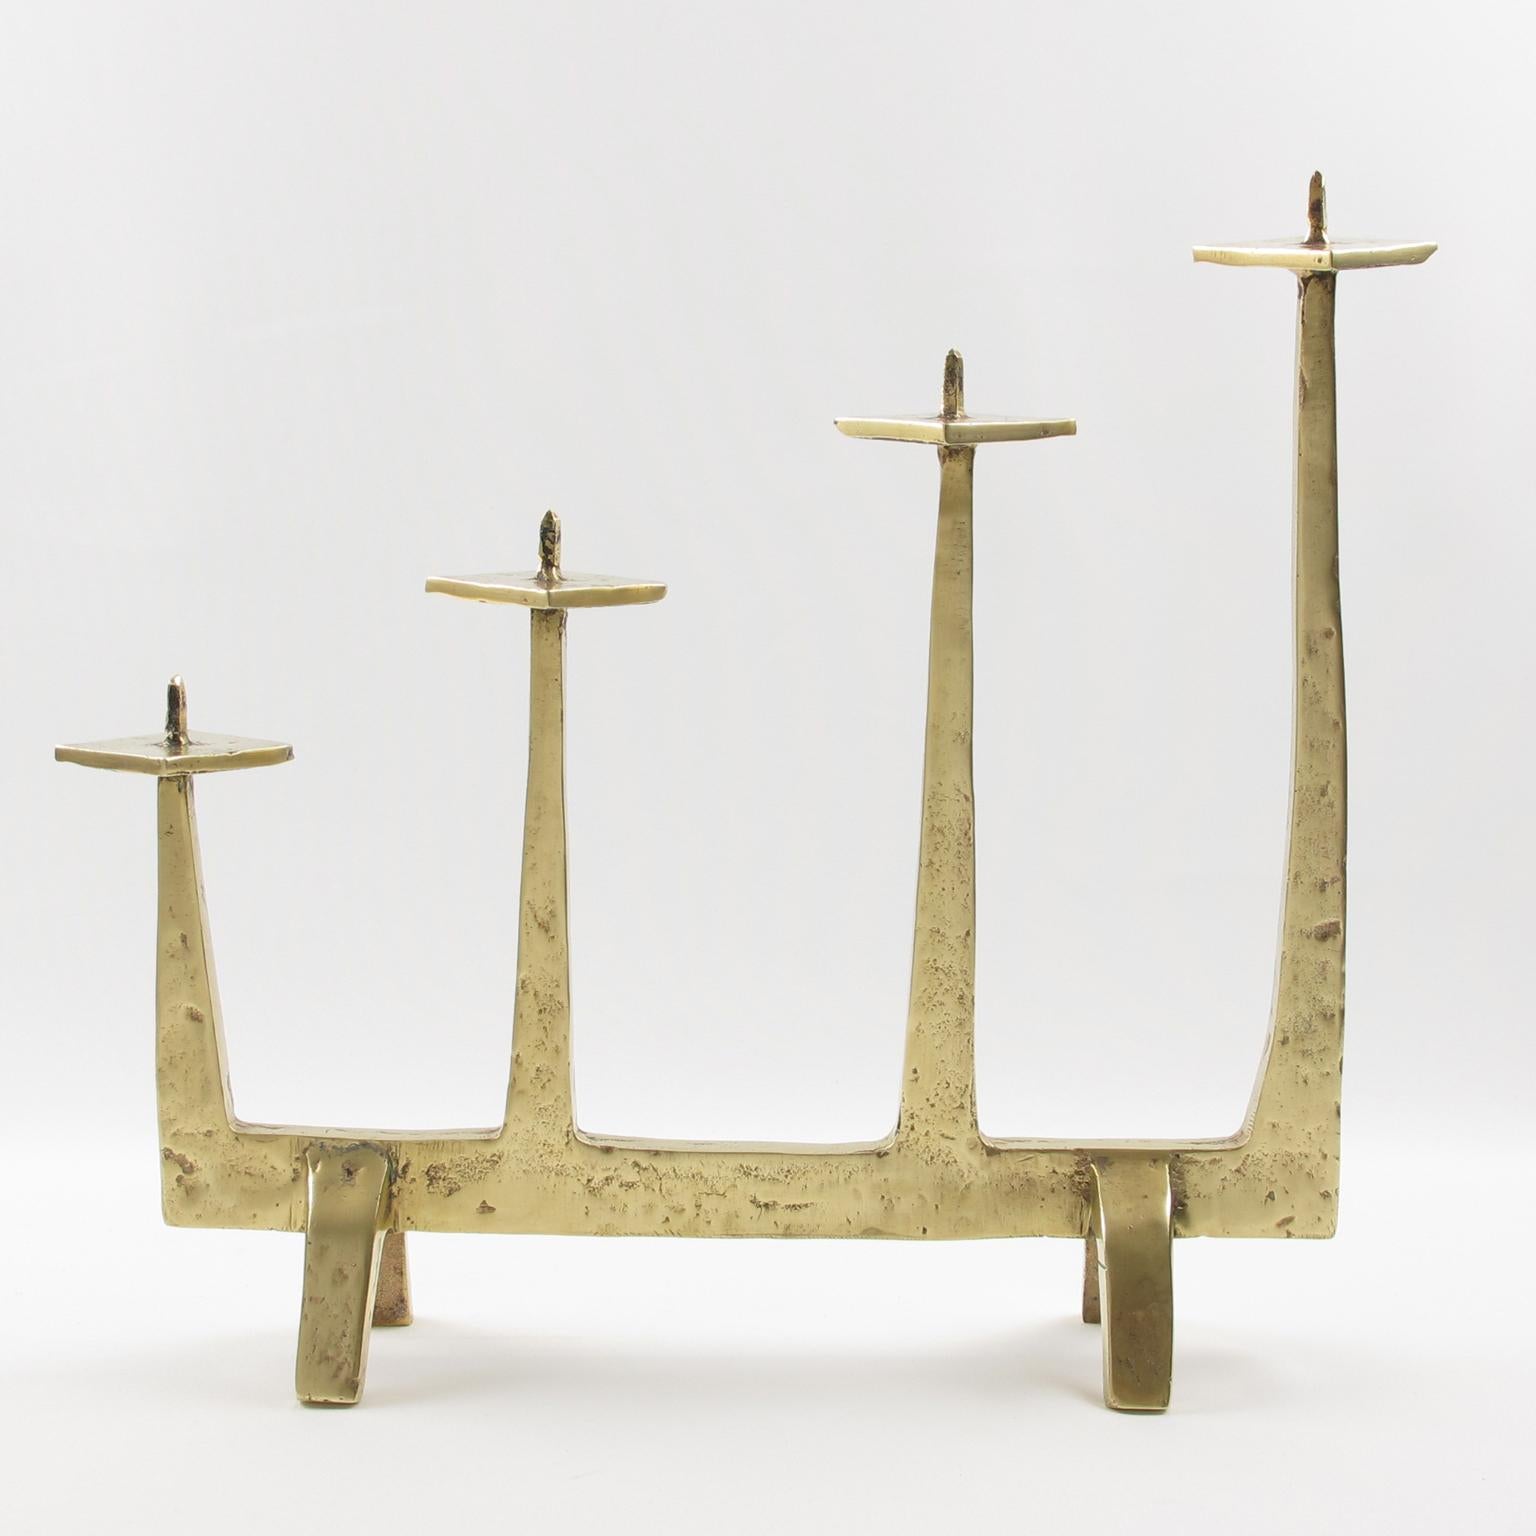 This elegant 1960s modern heavy bronze candlestick, candleholder, or candelabra has a design reminiscent of Felix Agostini's (1919-1980) work. The brutalist design is in a handmade-feel textured pattern with a gilded patina. This piece is highly